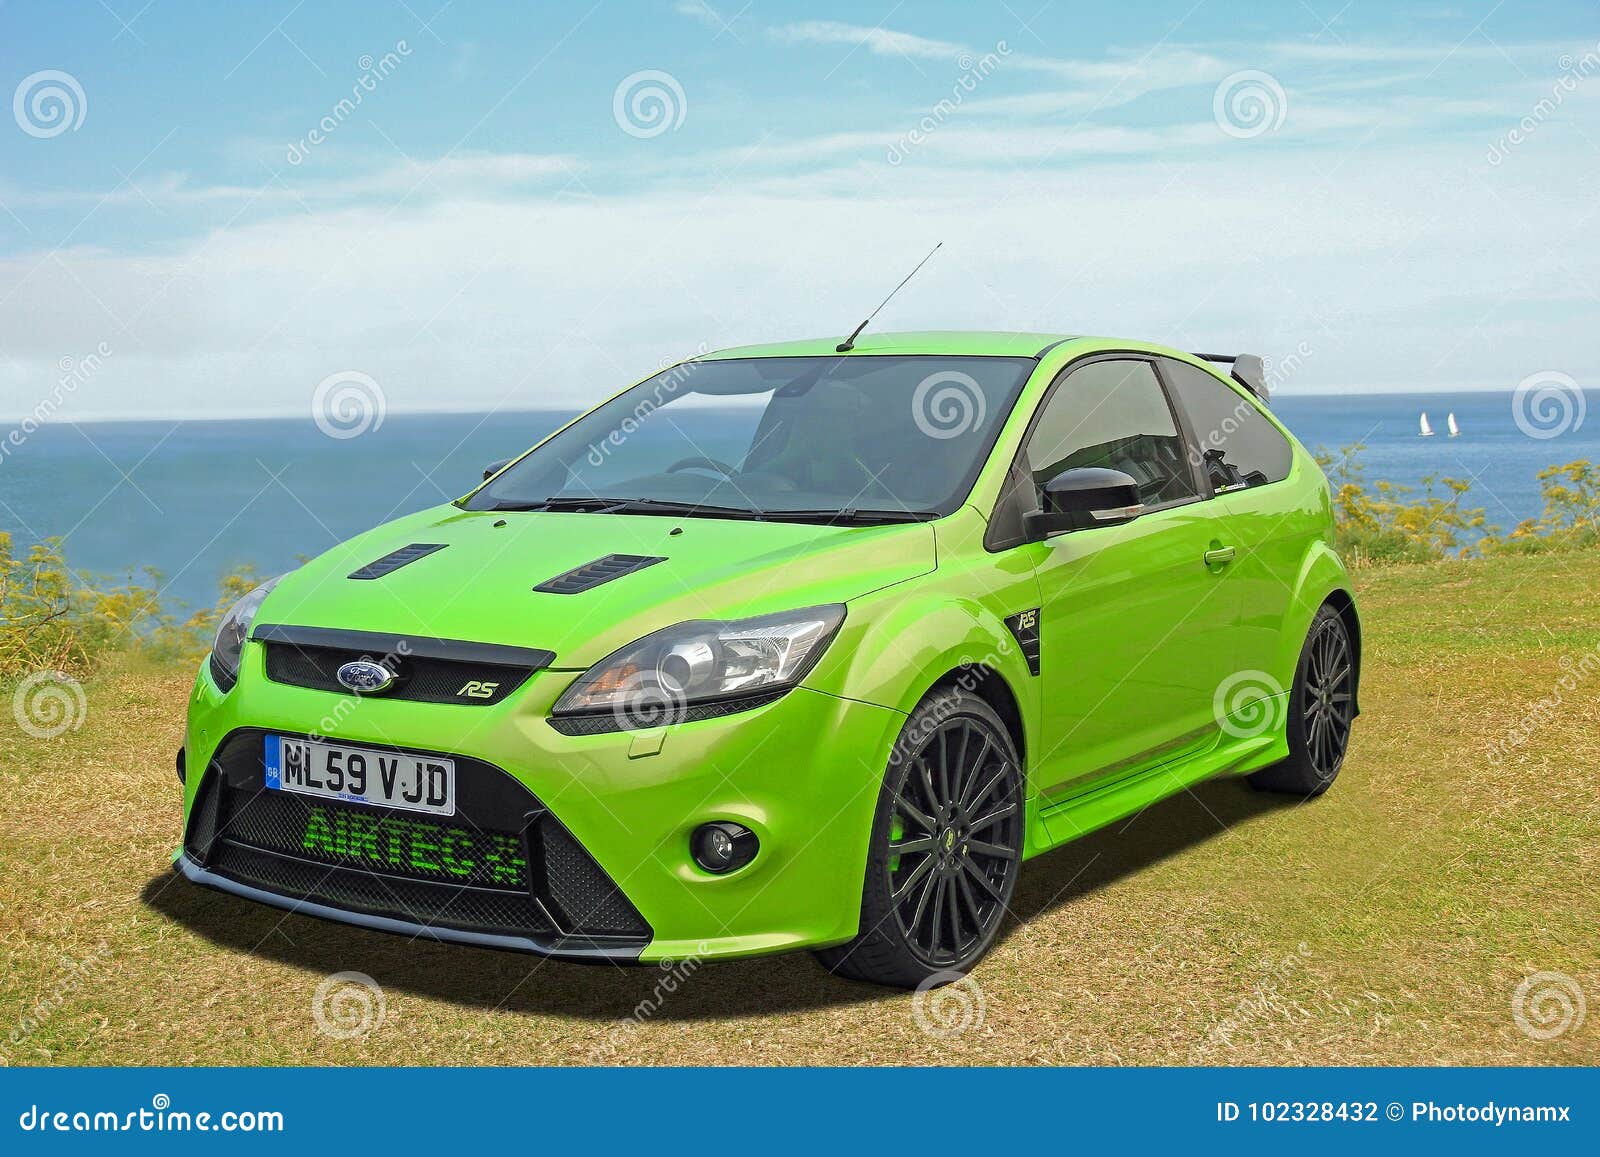 Ford focus rally sport car editorial Image of - 102328432